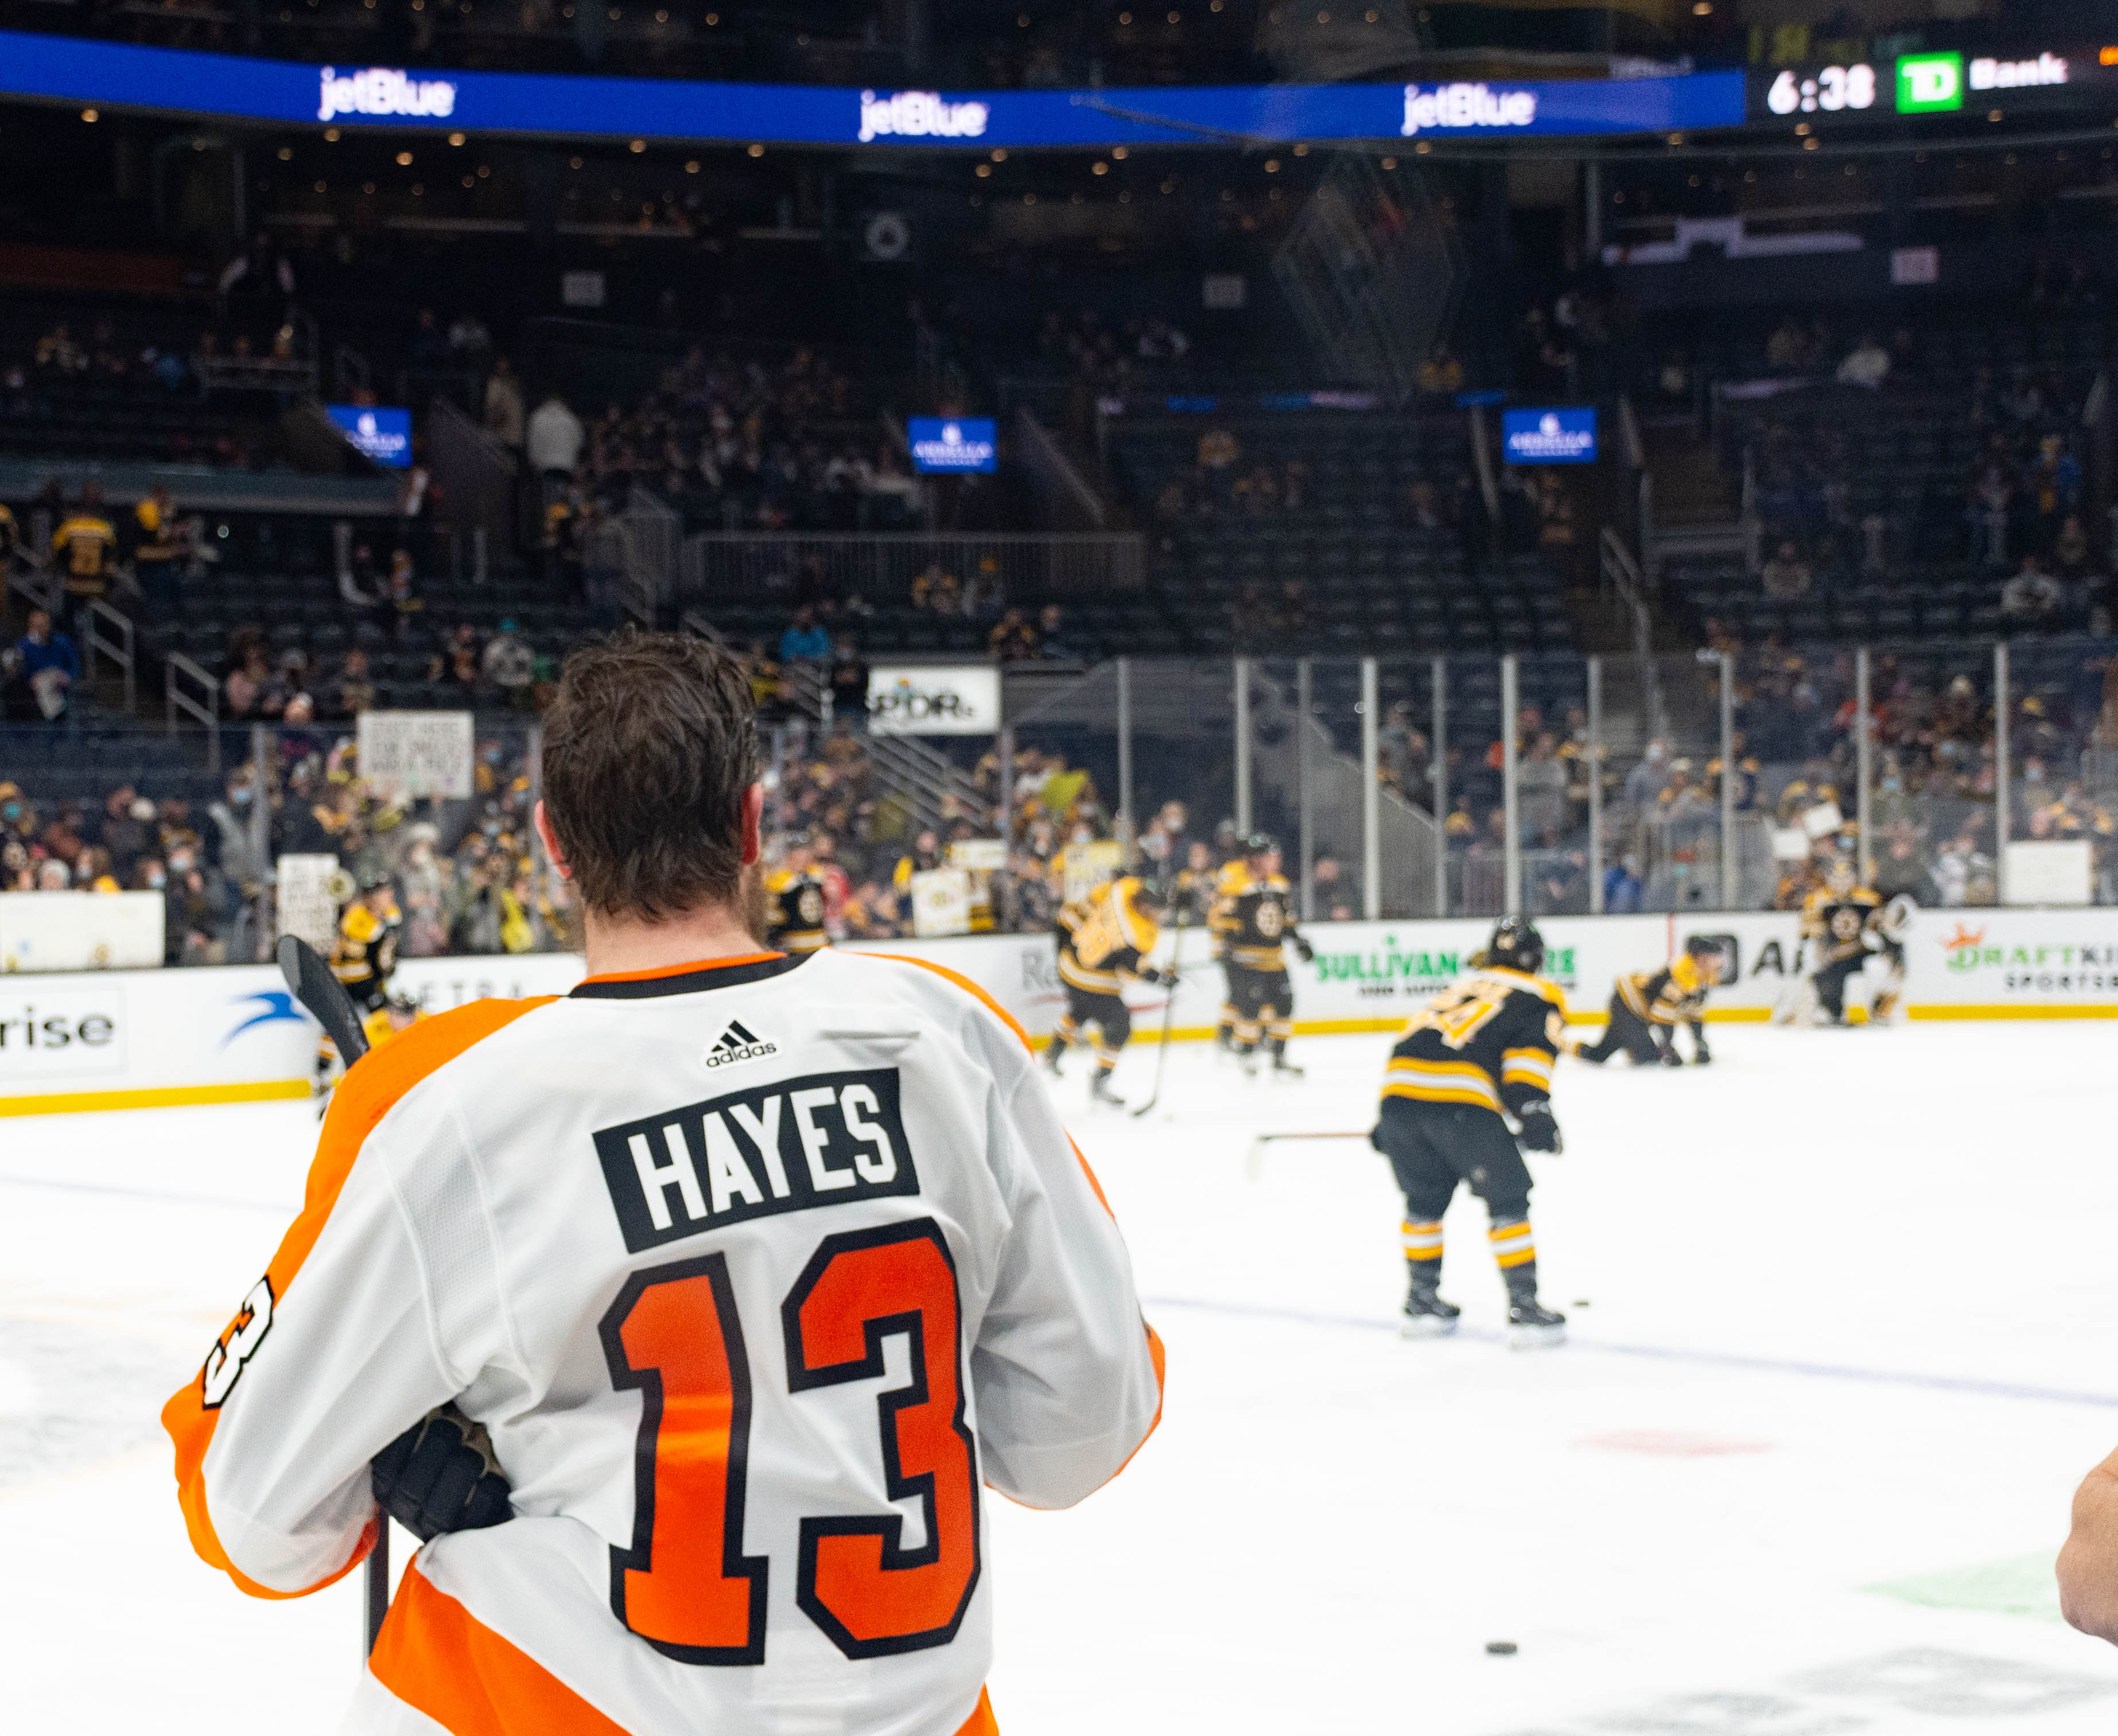 Flyers build chemistry through Boston connections, visiting Kevin Hayes'  family